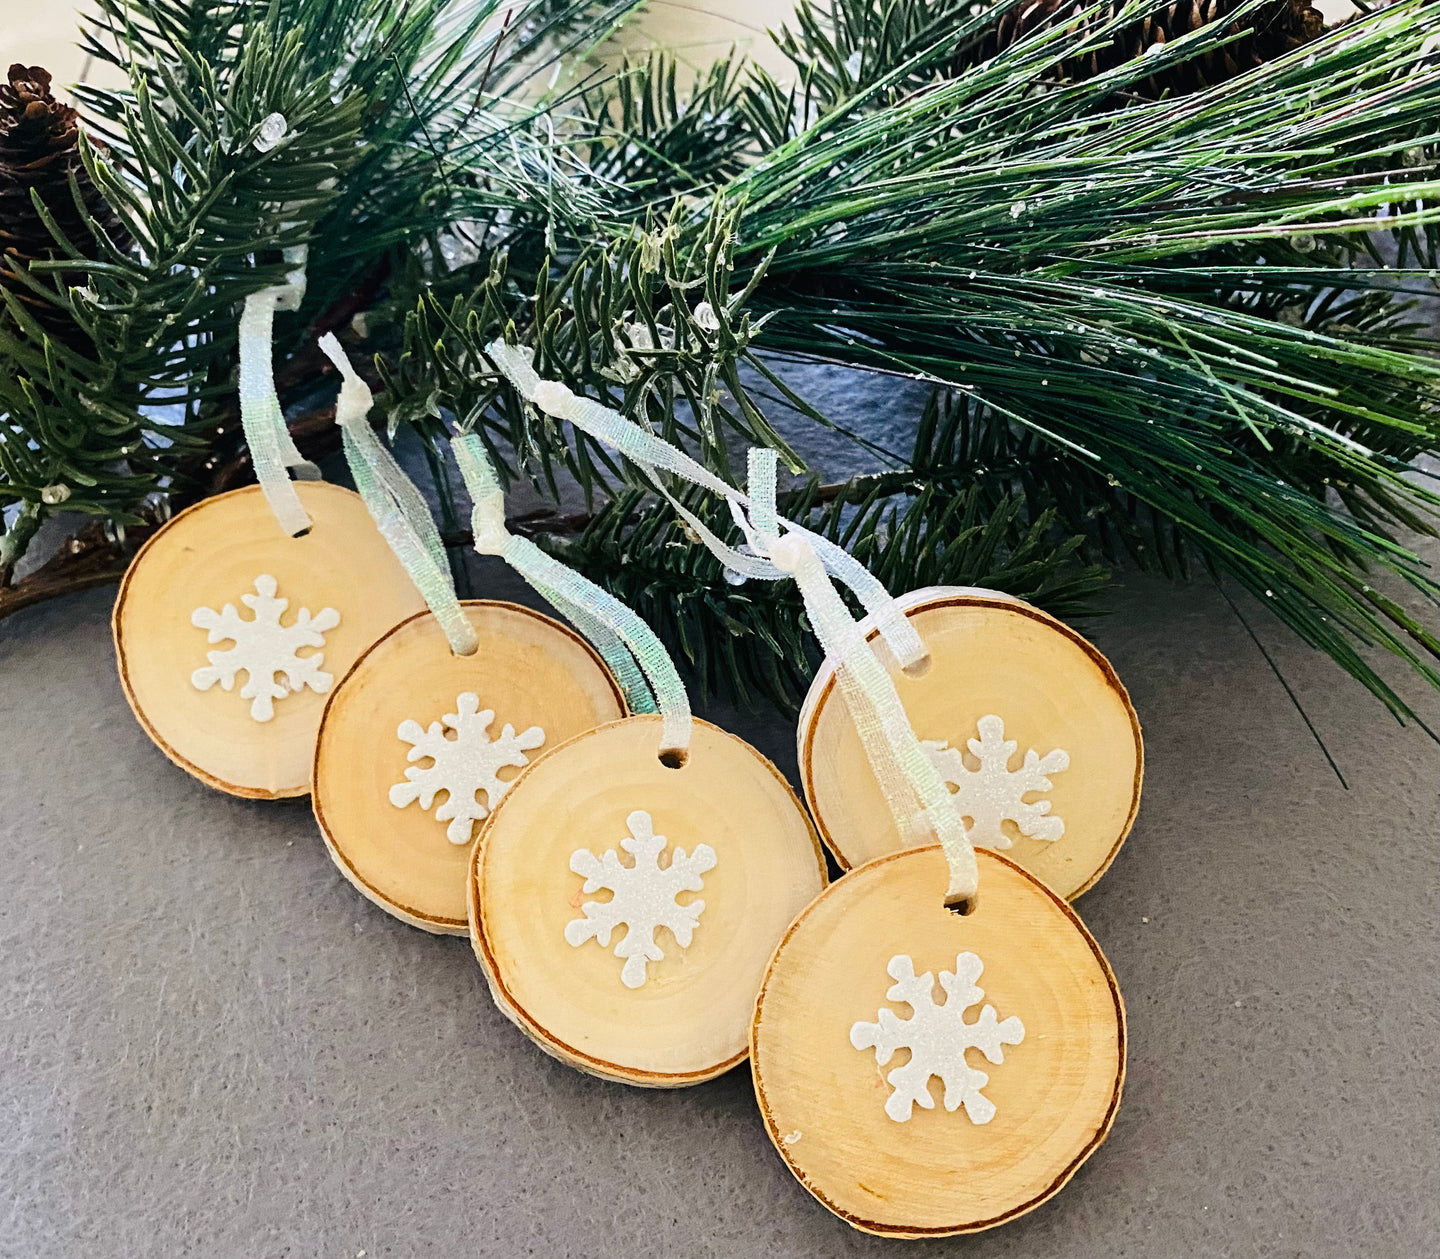 Snowflakes, Bows, or Trees on Birch Wood Ornaments set of 5